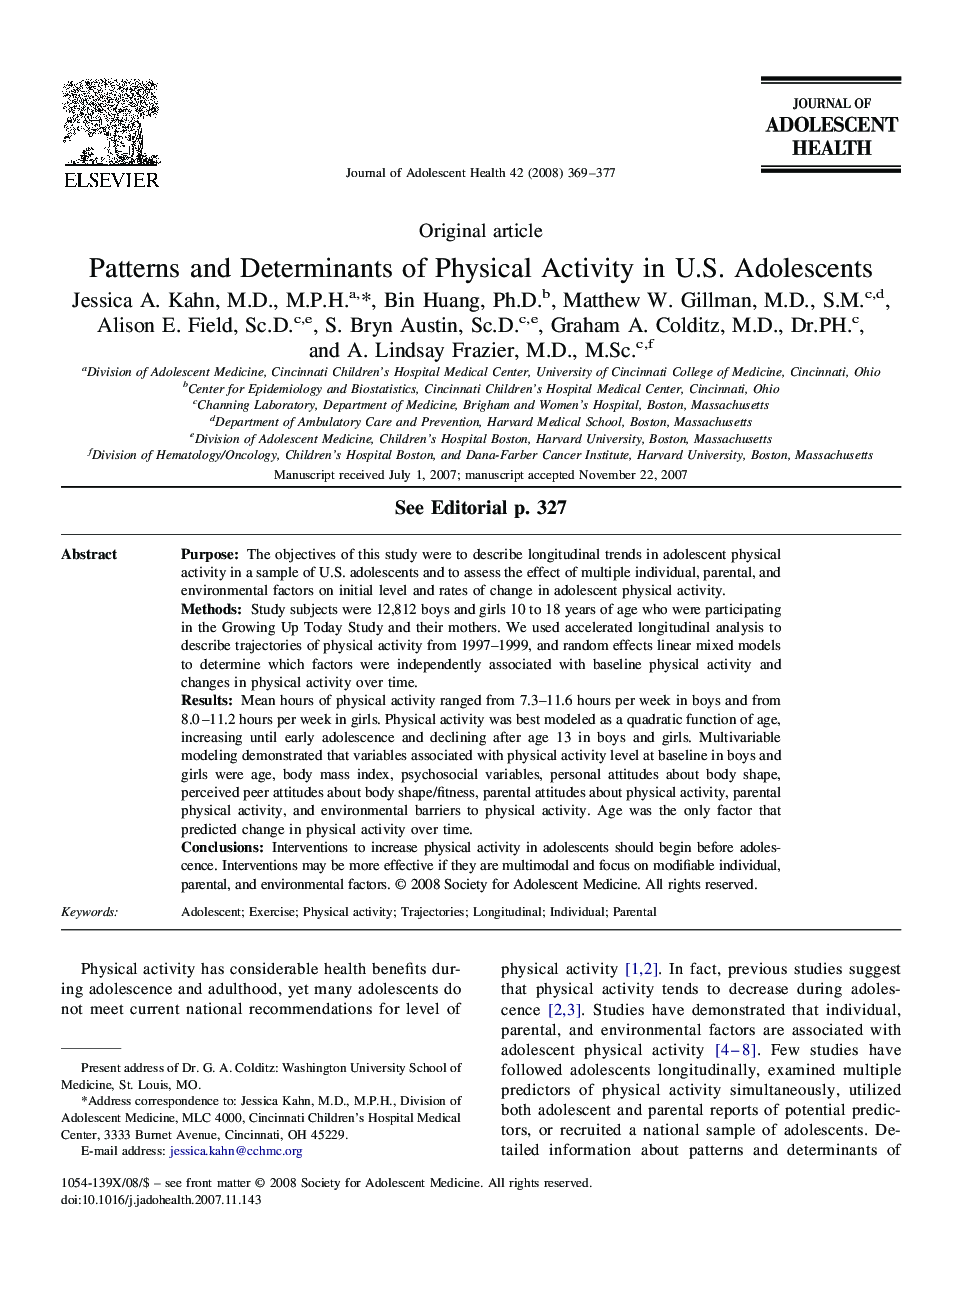 Patterns and Determinants of Physical Activity in U.S. Adolescents